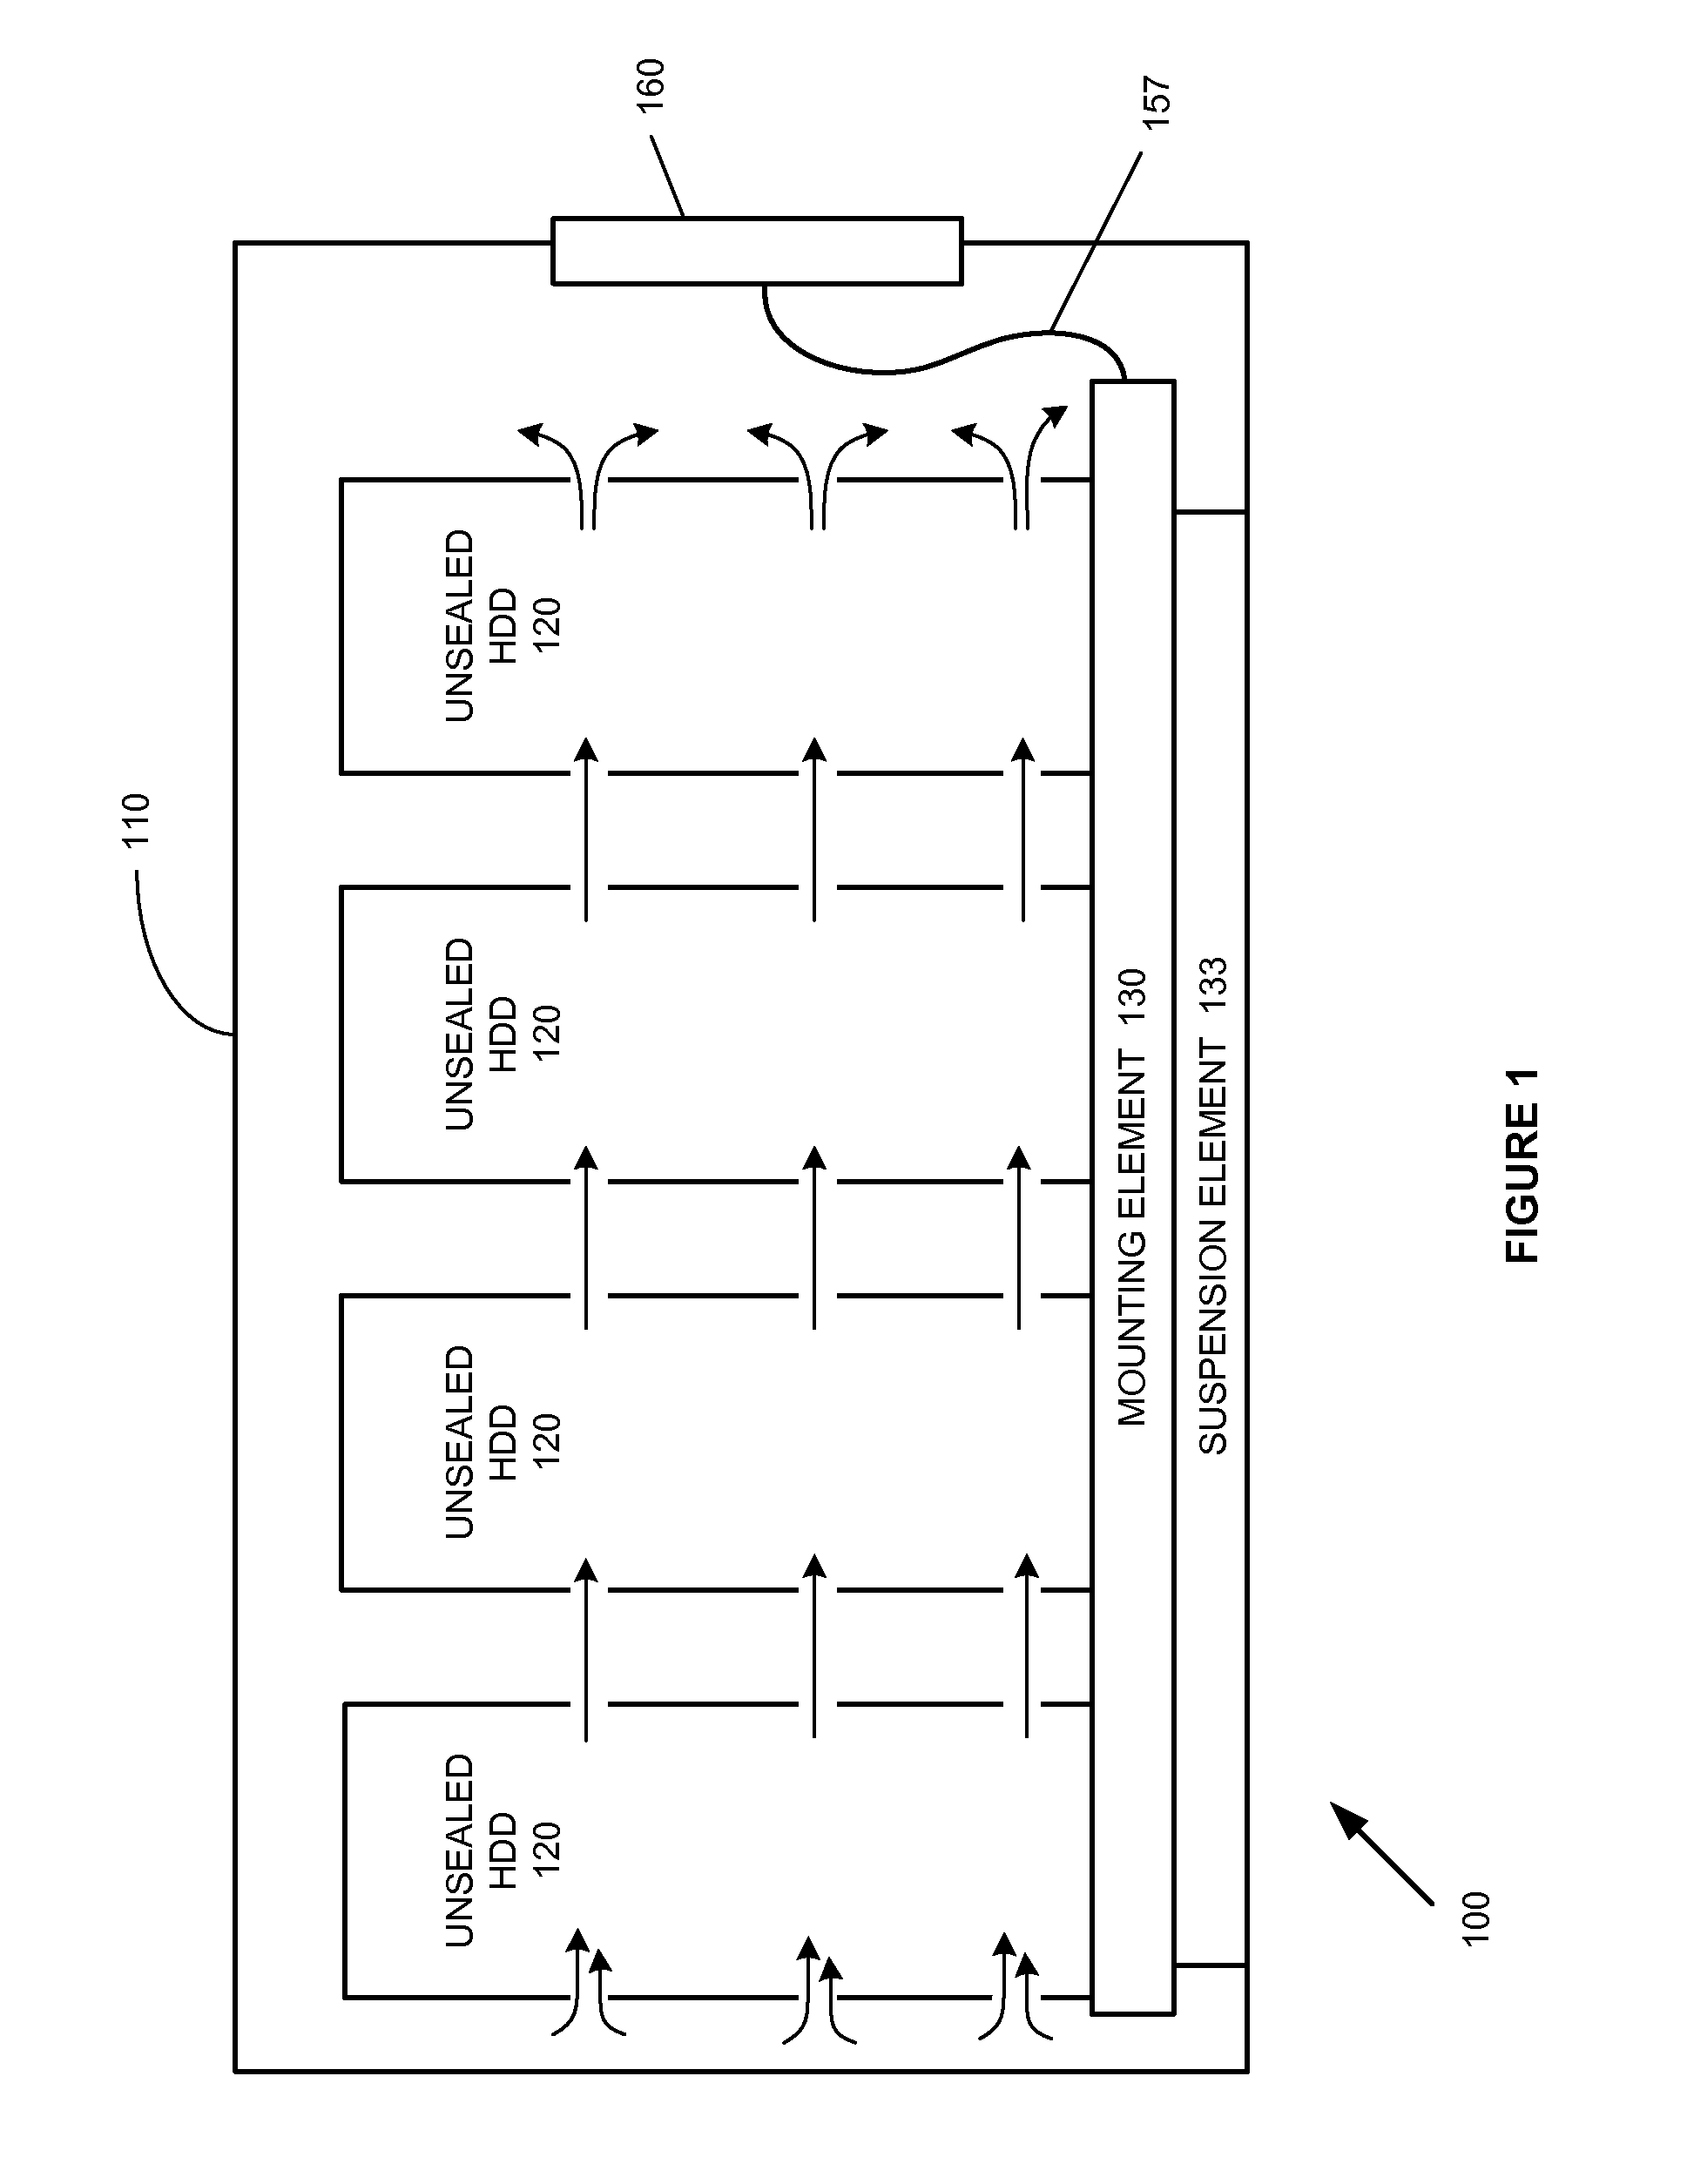 Storage canister with multiple storage device mounting elements